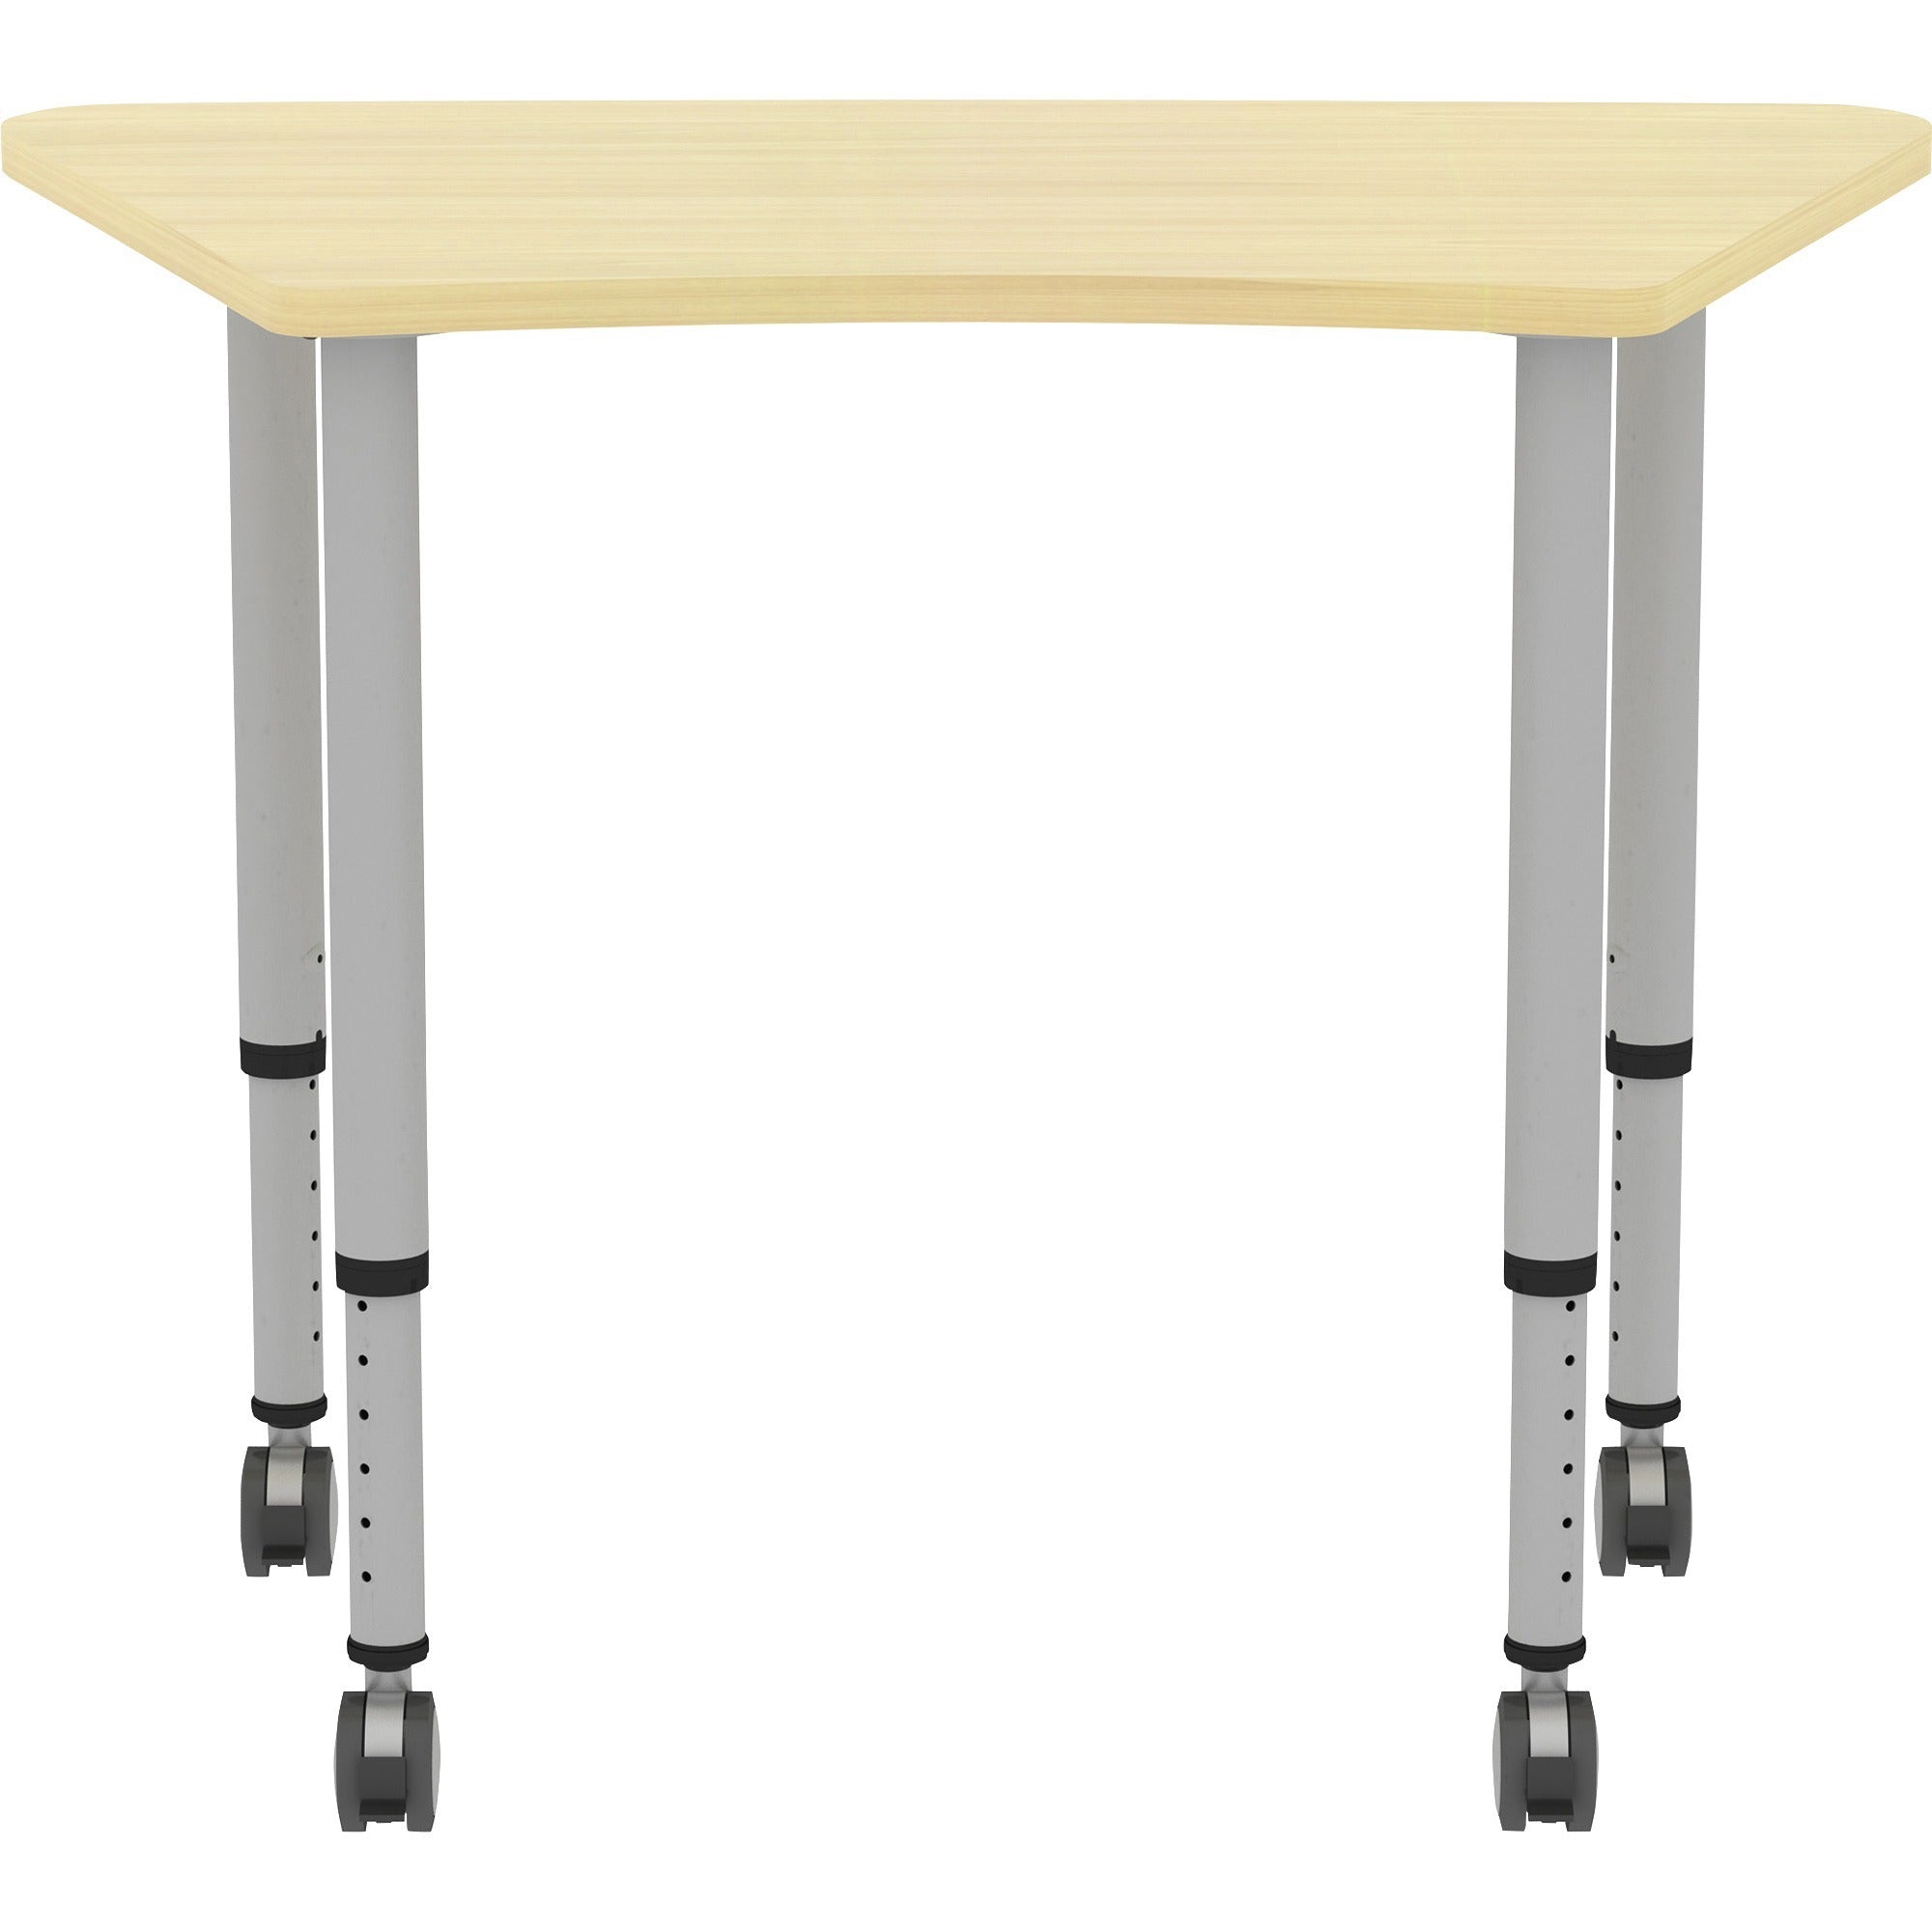 lorell-attune-height-adjustable-multipurpose-curved-table-for-table-toptrapezoid-top-adjustable-height-2662-to-3362-adjustment-x-60-table-top-width-x-2362-table-top-depth-3362-height-assembly-required-laminated-maple-laminat_llr69584 - 3